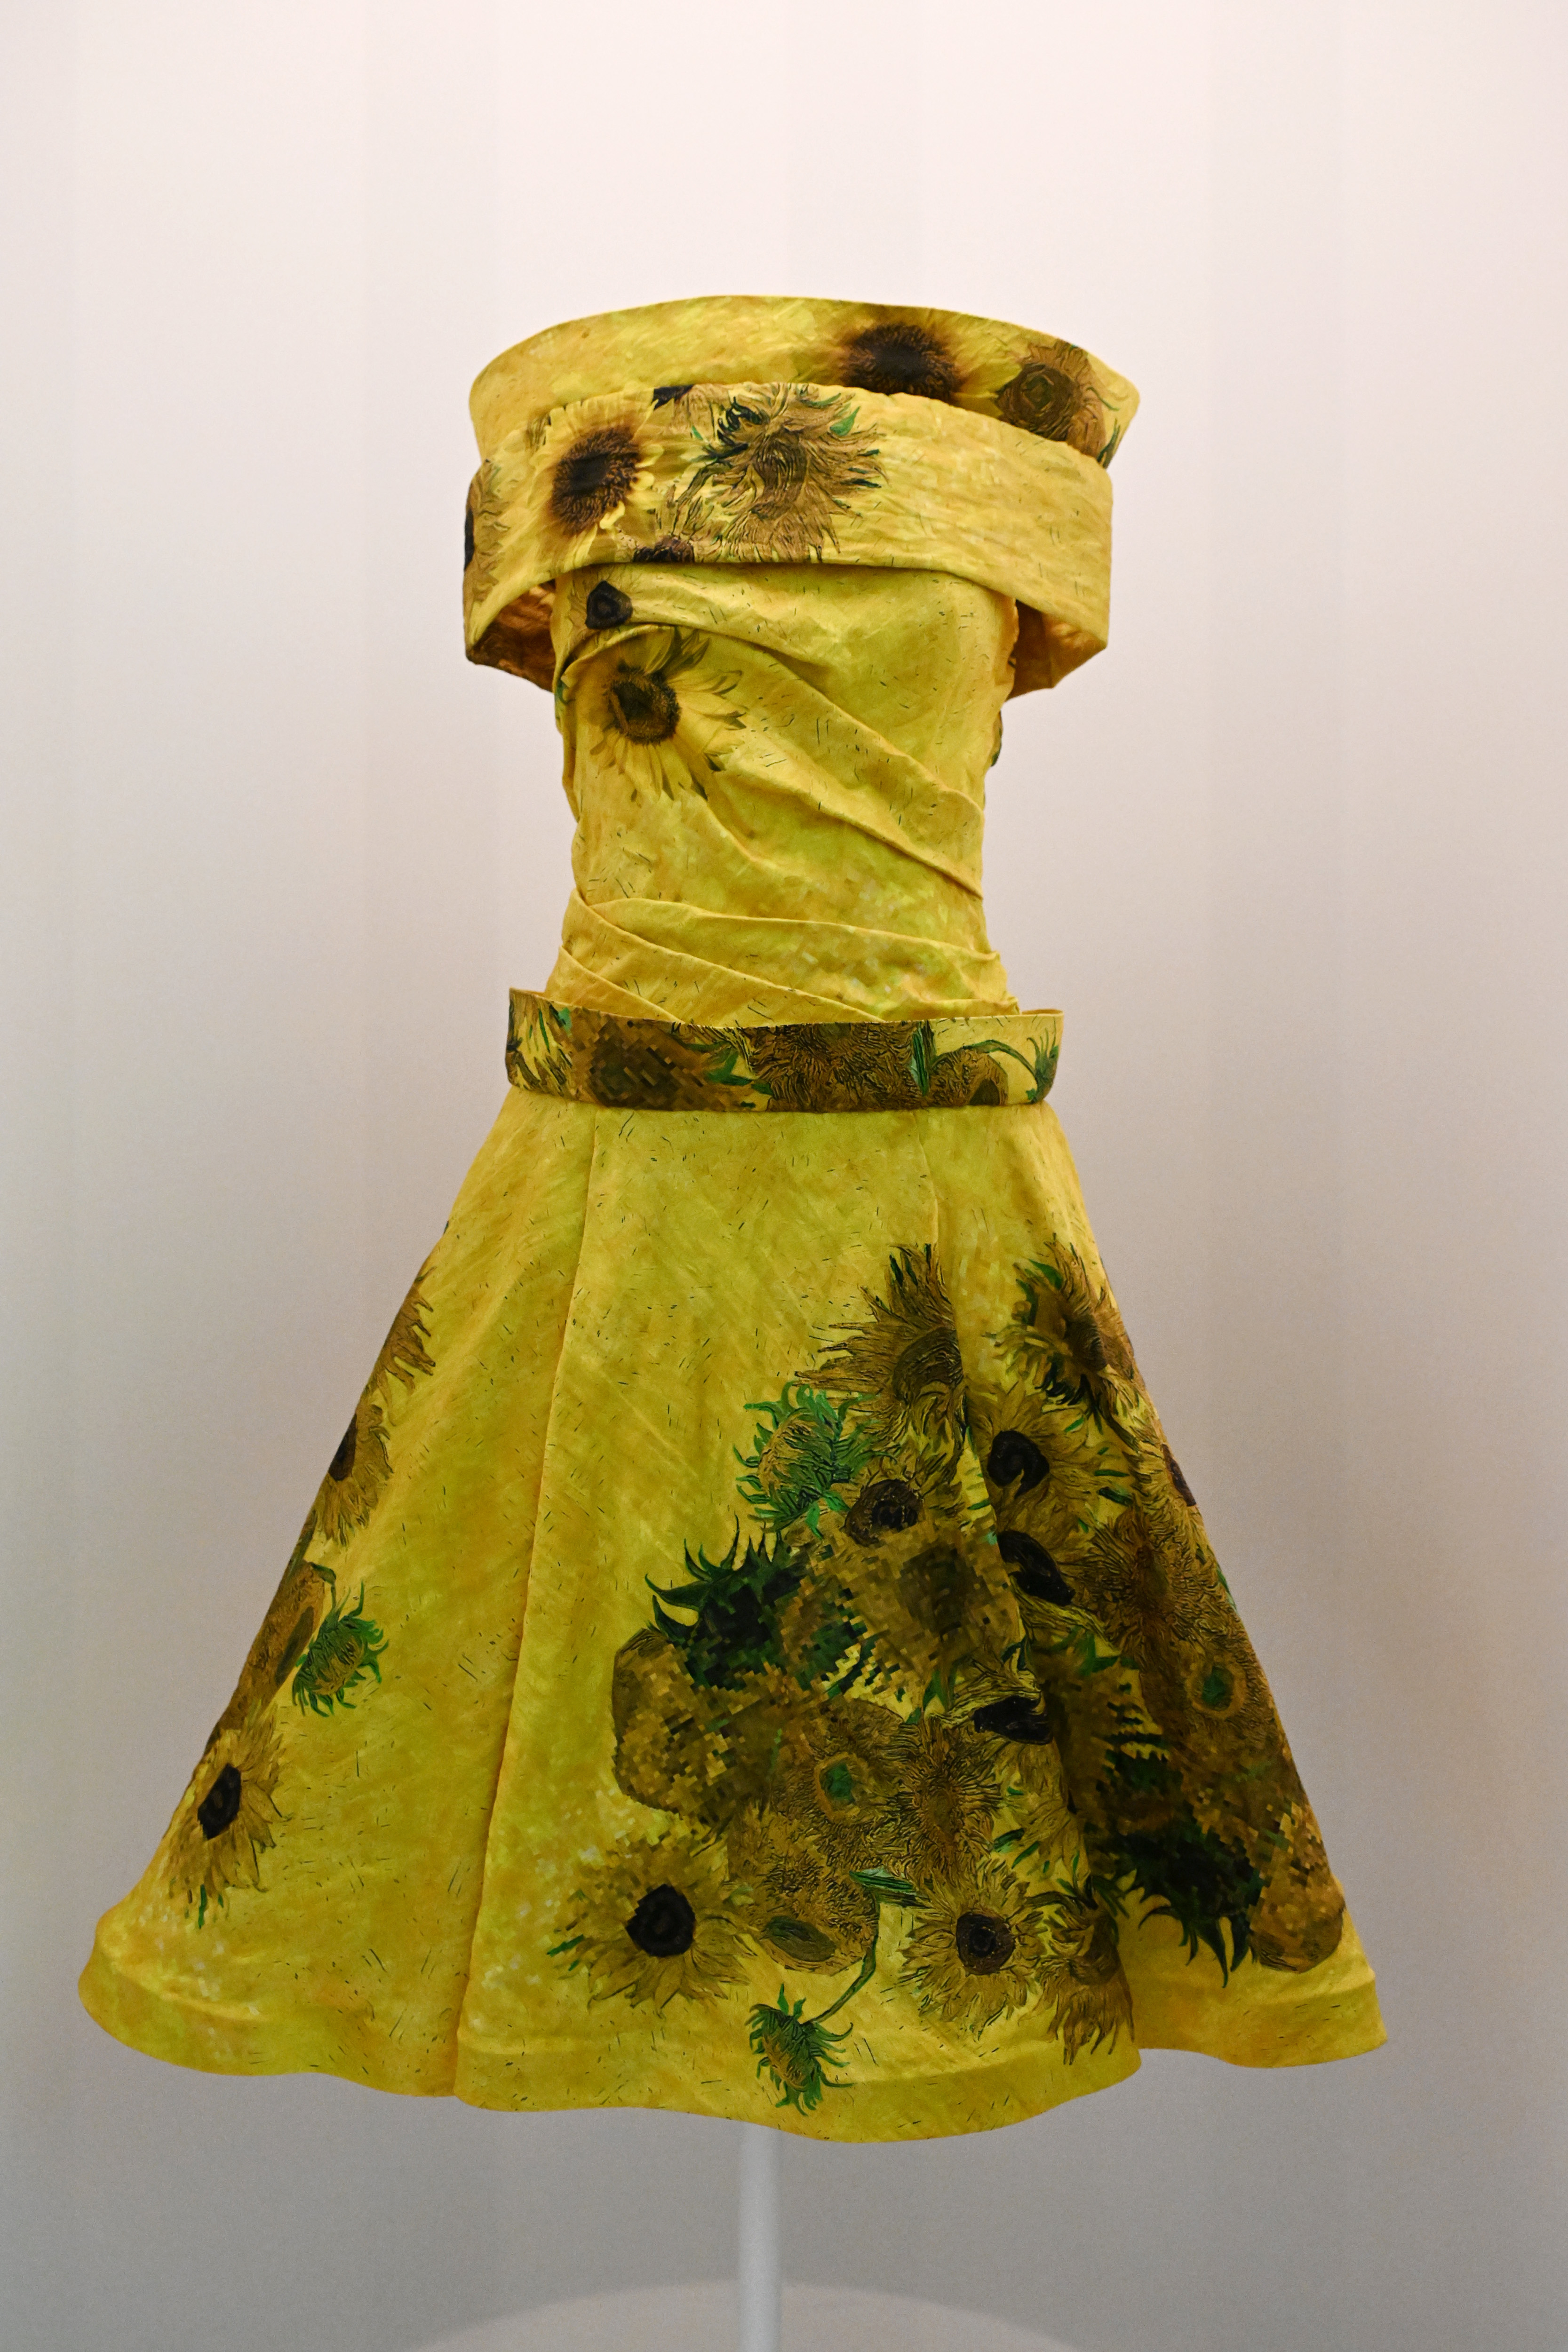 Vintage-style dress with sunflower print displayed on a mannequin